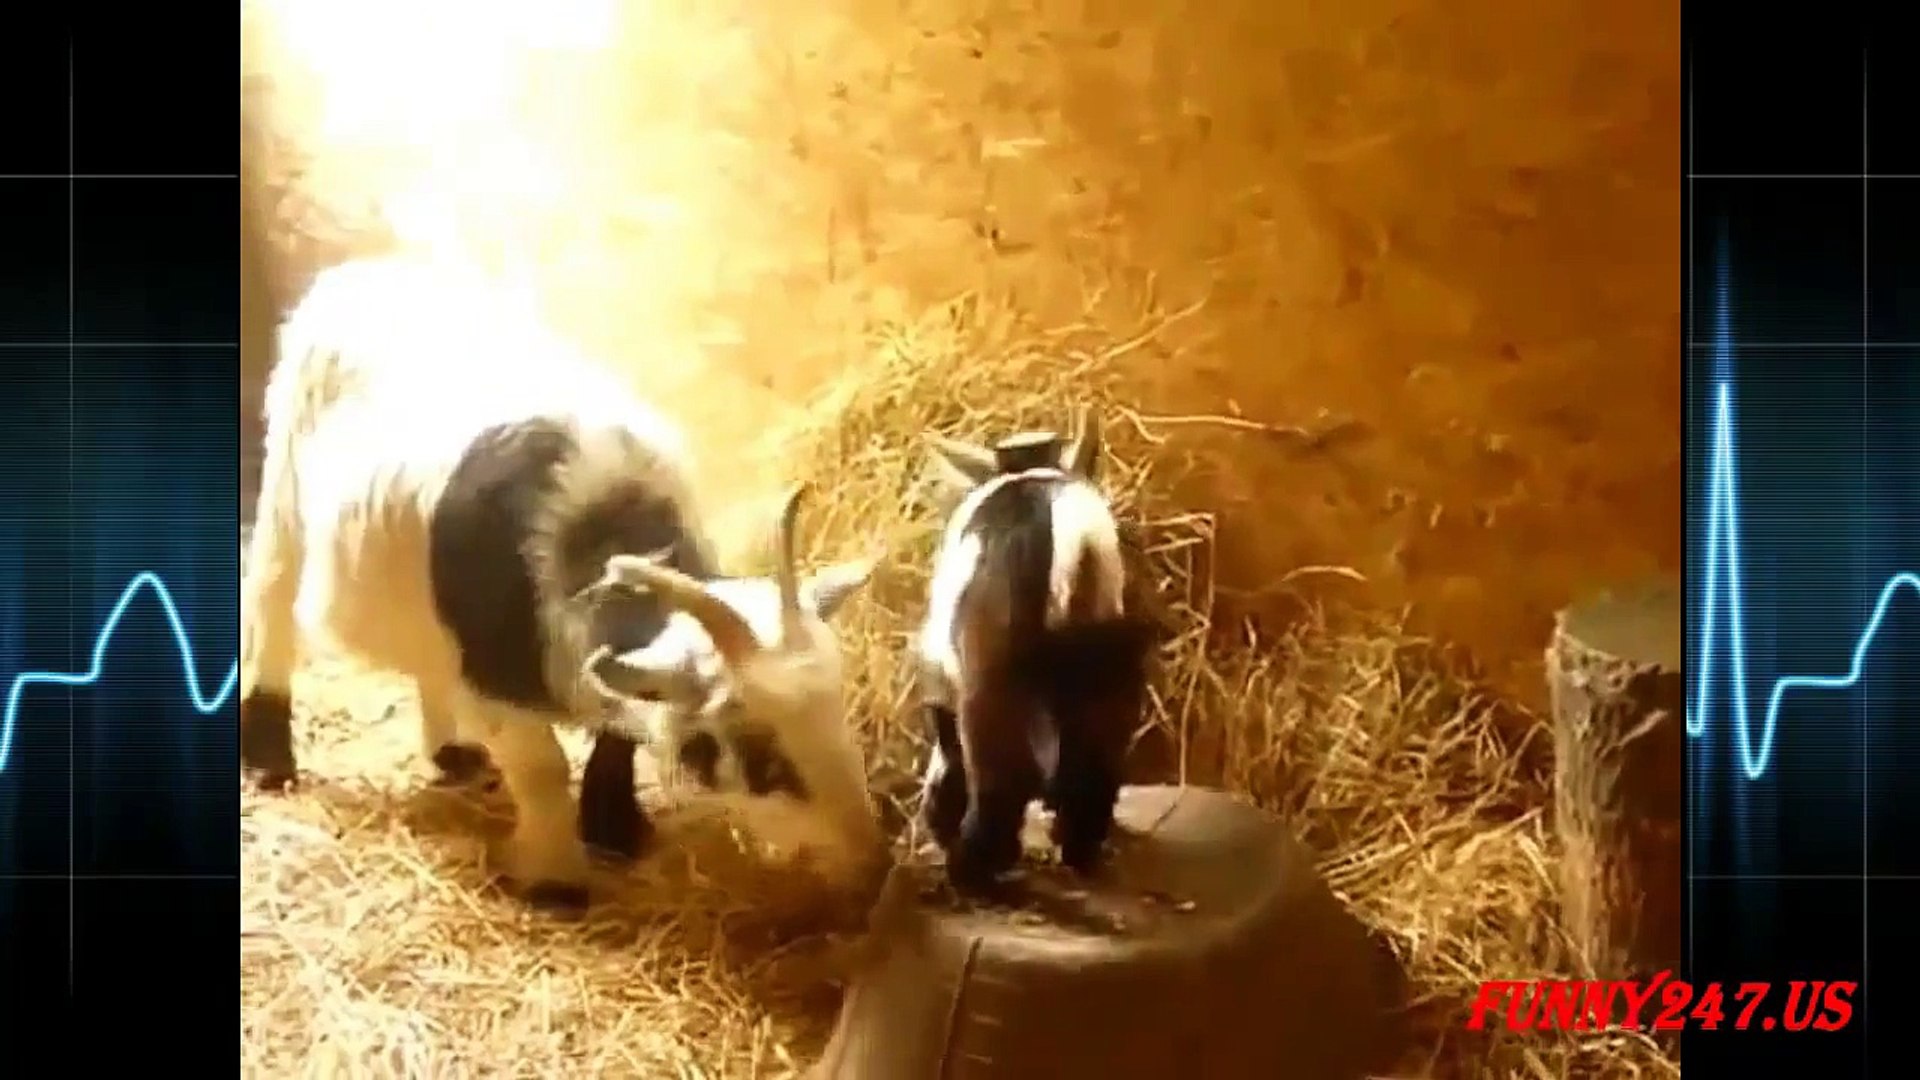 ⁣Goats: Funny Video With Baby Goats - Love animal